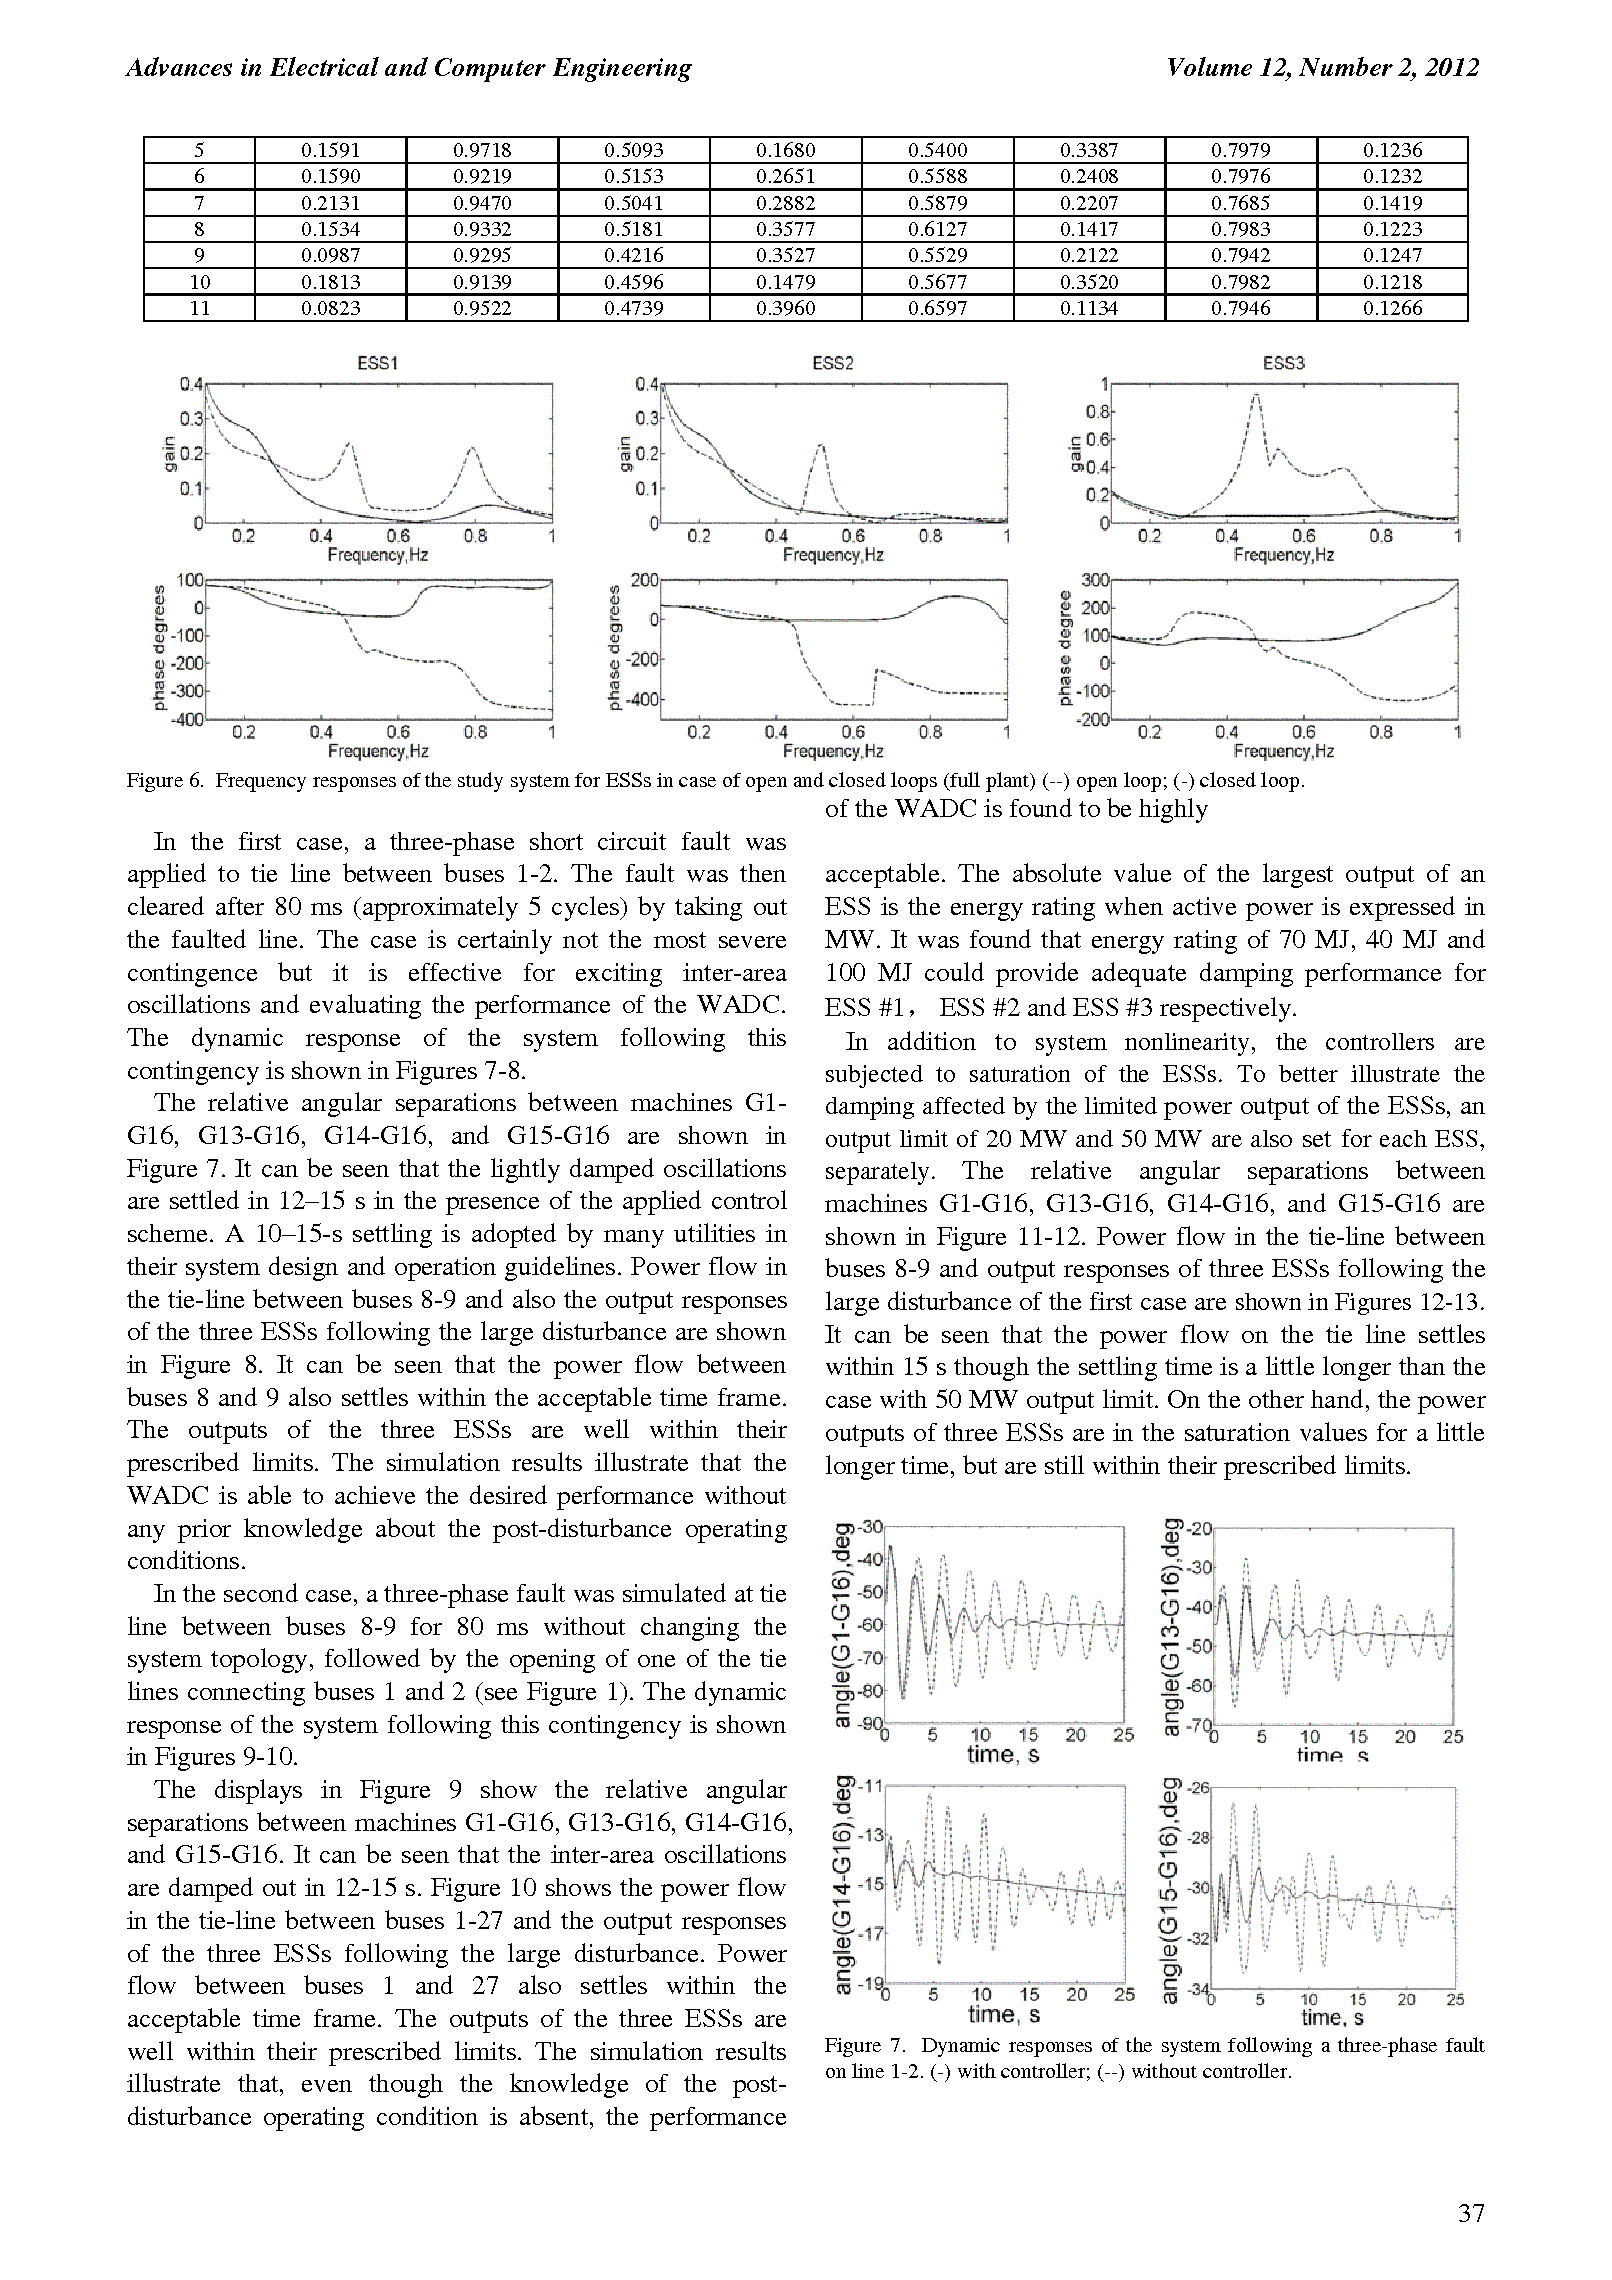 PDF Quickview for paper with DOI:10.4316/AECE.2012.02006